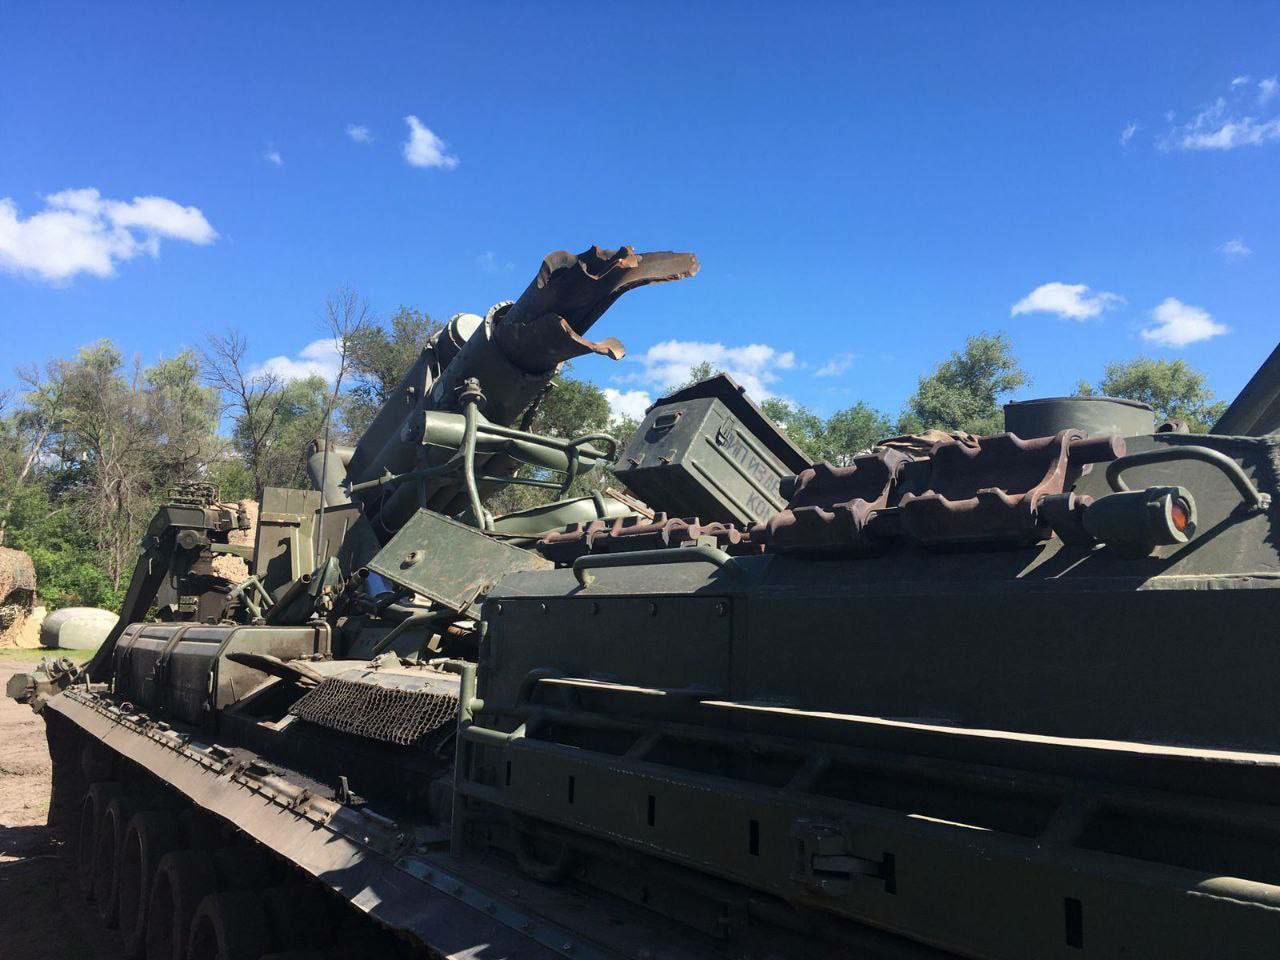 The russians used artillery so actively some systems had their barrels rupture, like the gun of this 2S7 Malka self-propelled howitzer. July 2022